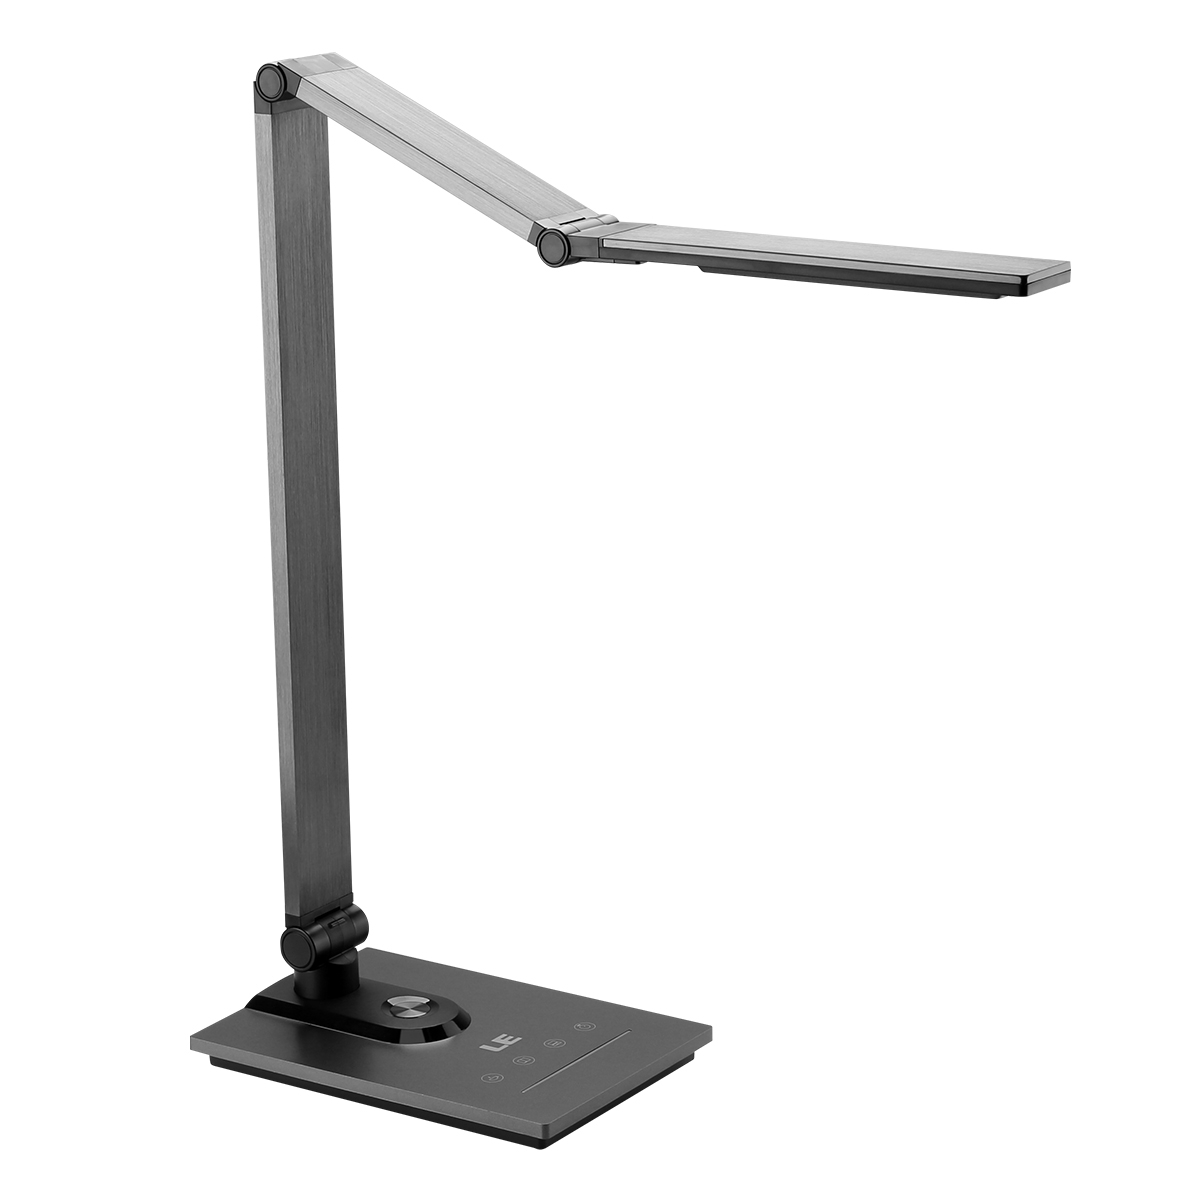 Le Metal Led Desk Lamp Dimmable 3 Color Modes With Usb Output Port Memory Function Timer Touch Control Table Lamp For Reading Office Study intended for size 1200 X 1200